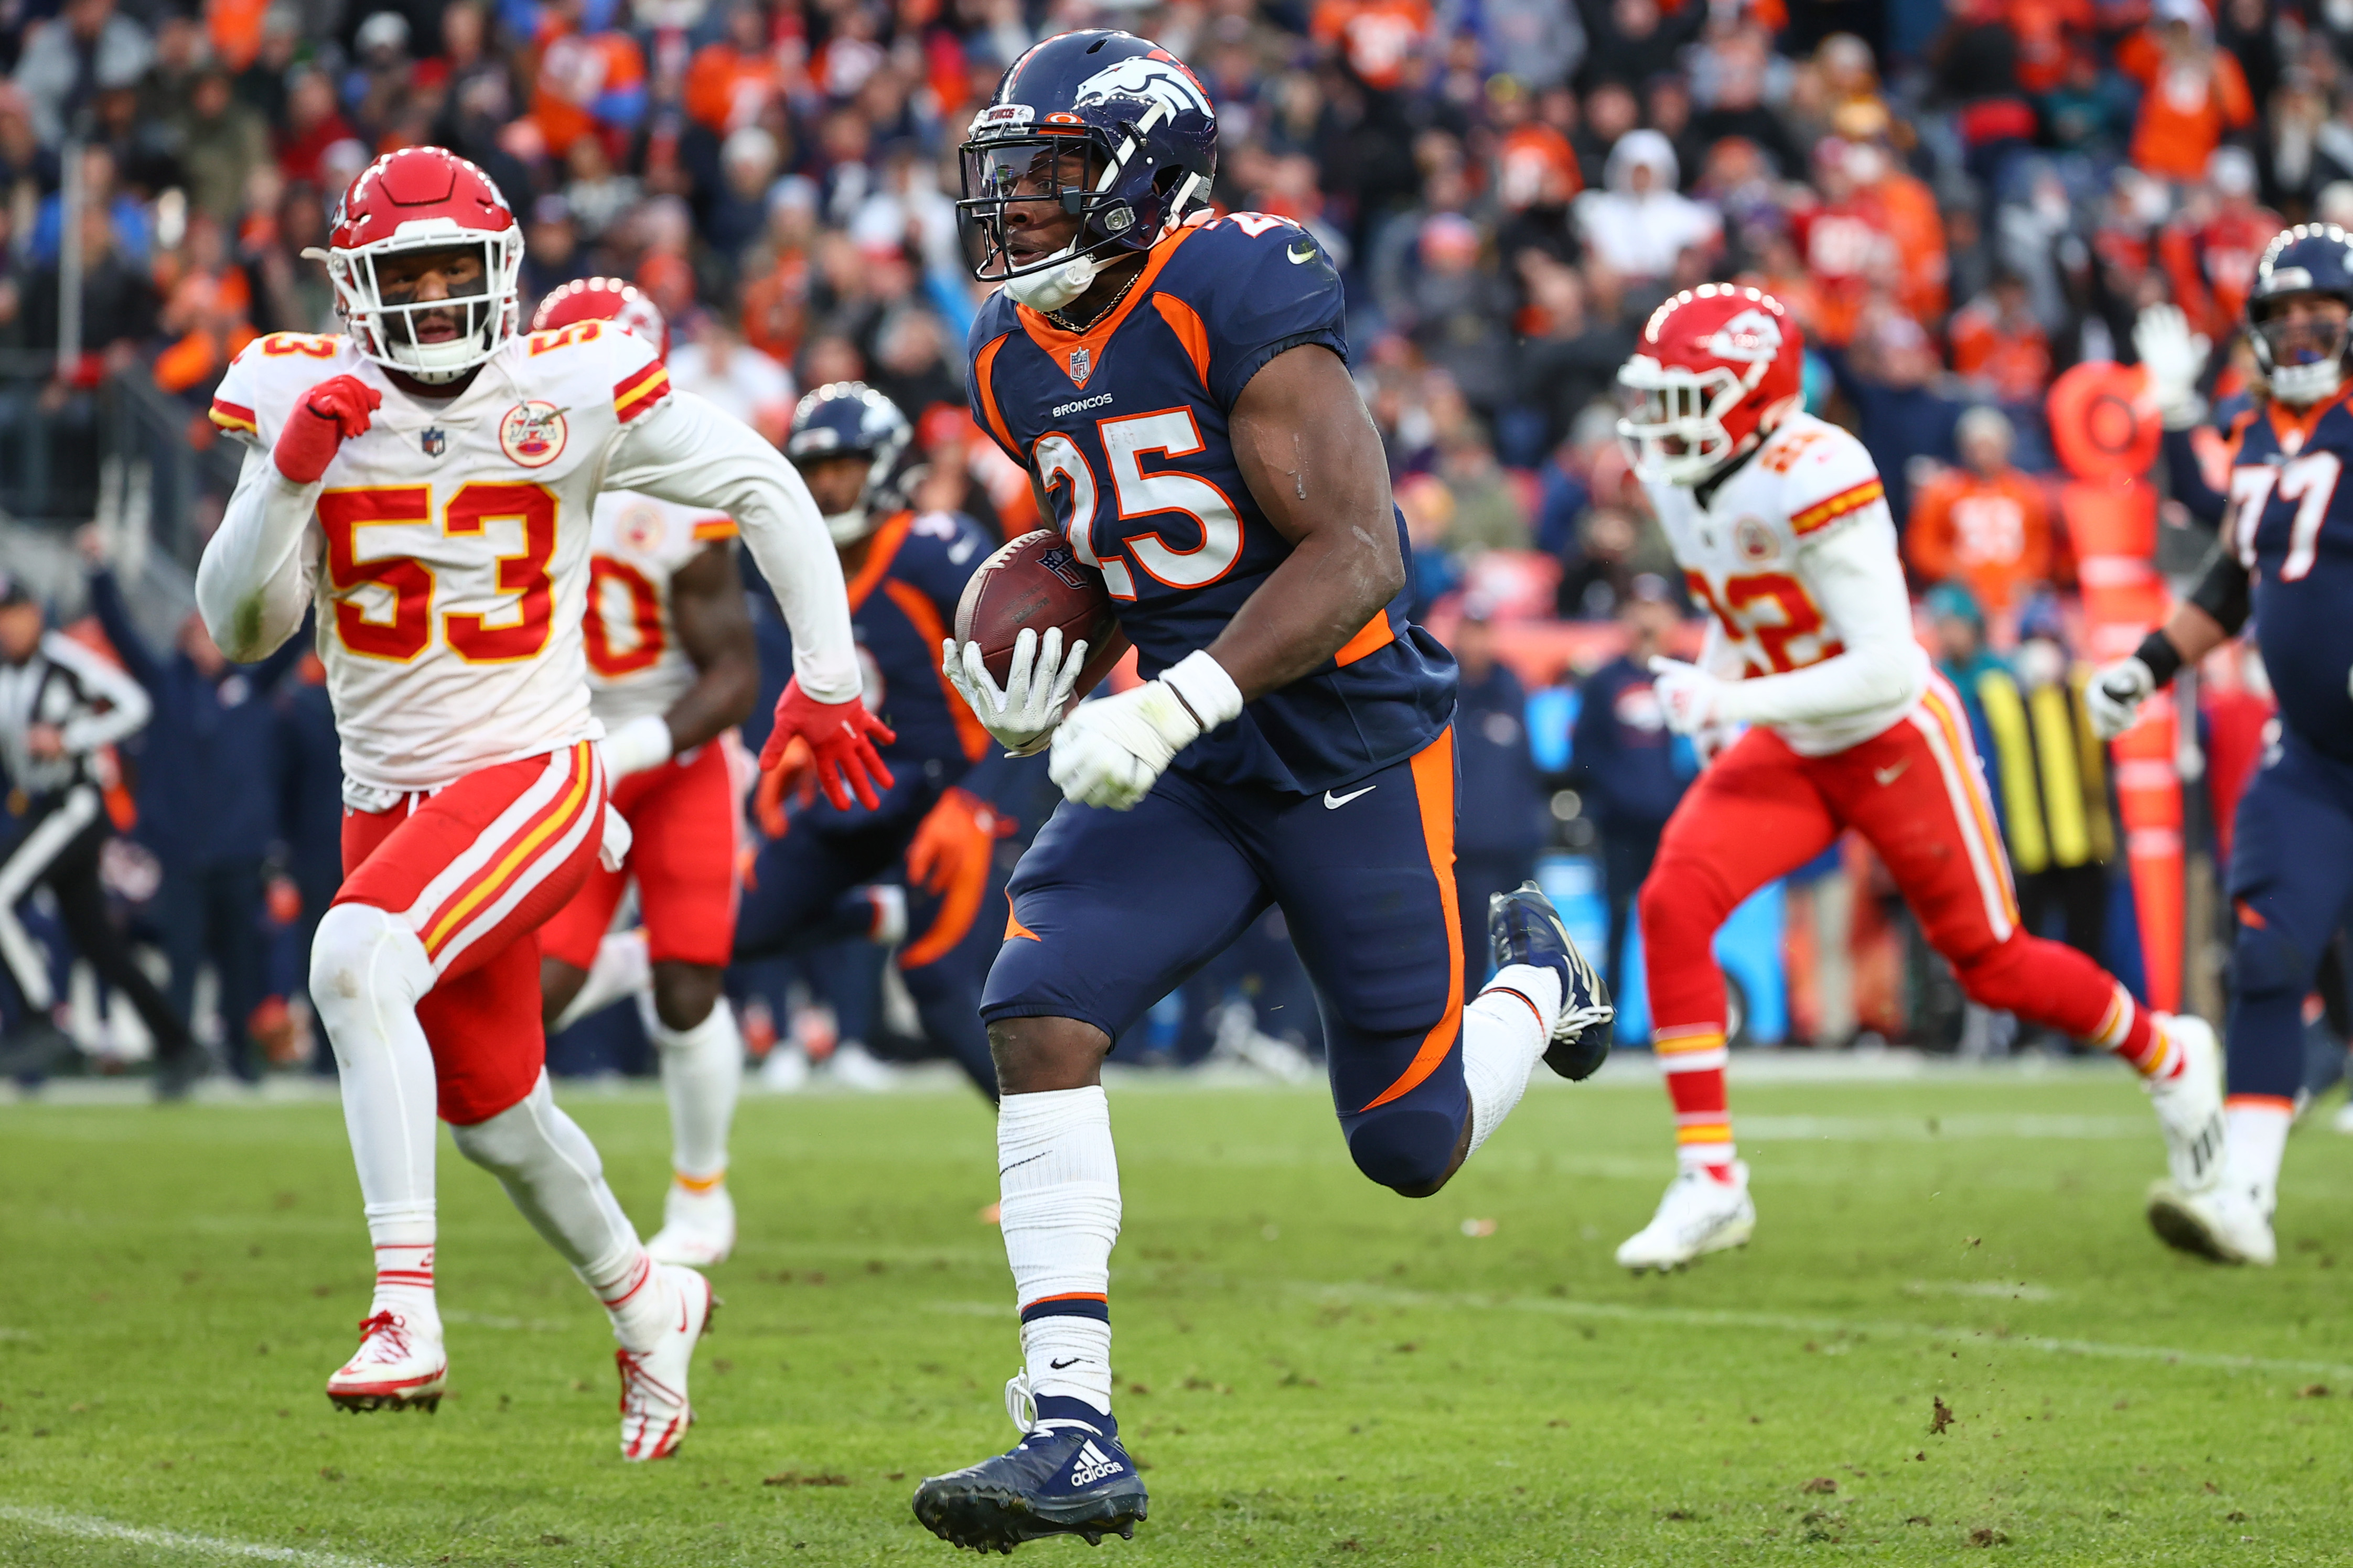 Melvin Gordon #25 of the Denver Broncos rushes for a touchdown during the third quarter against the Kansas City Chiefs at Empower Field At Mile High on January 08, 2022 in Denver, Colorado.